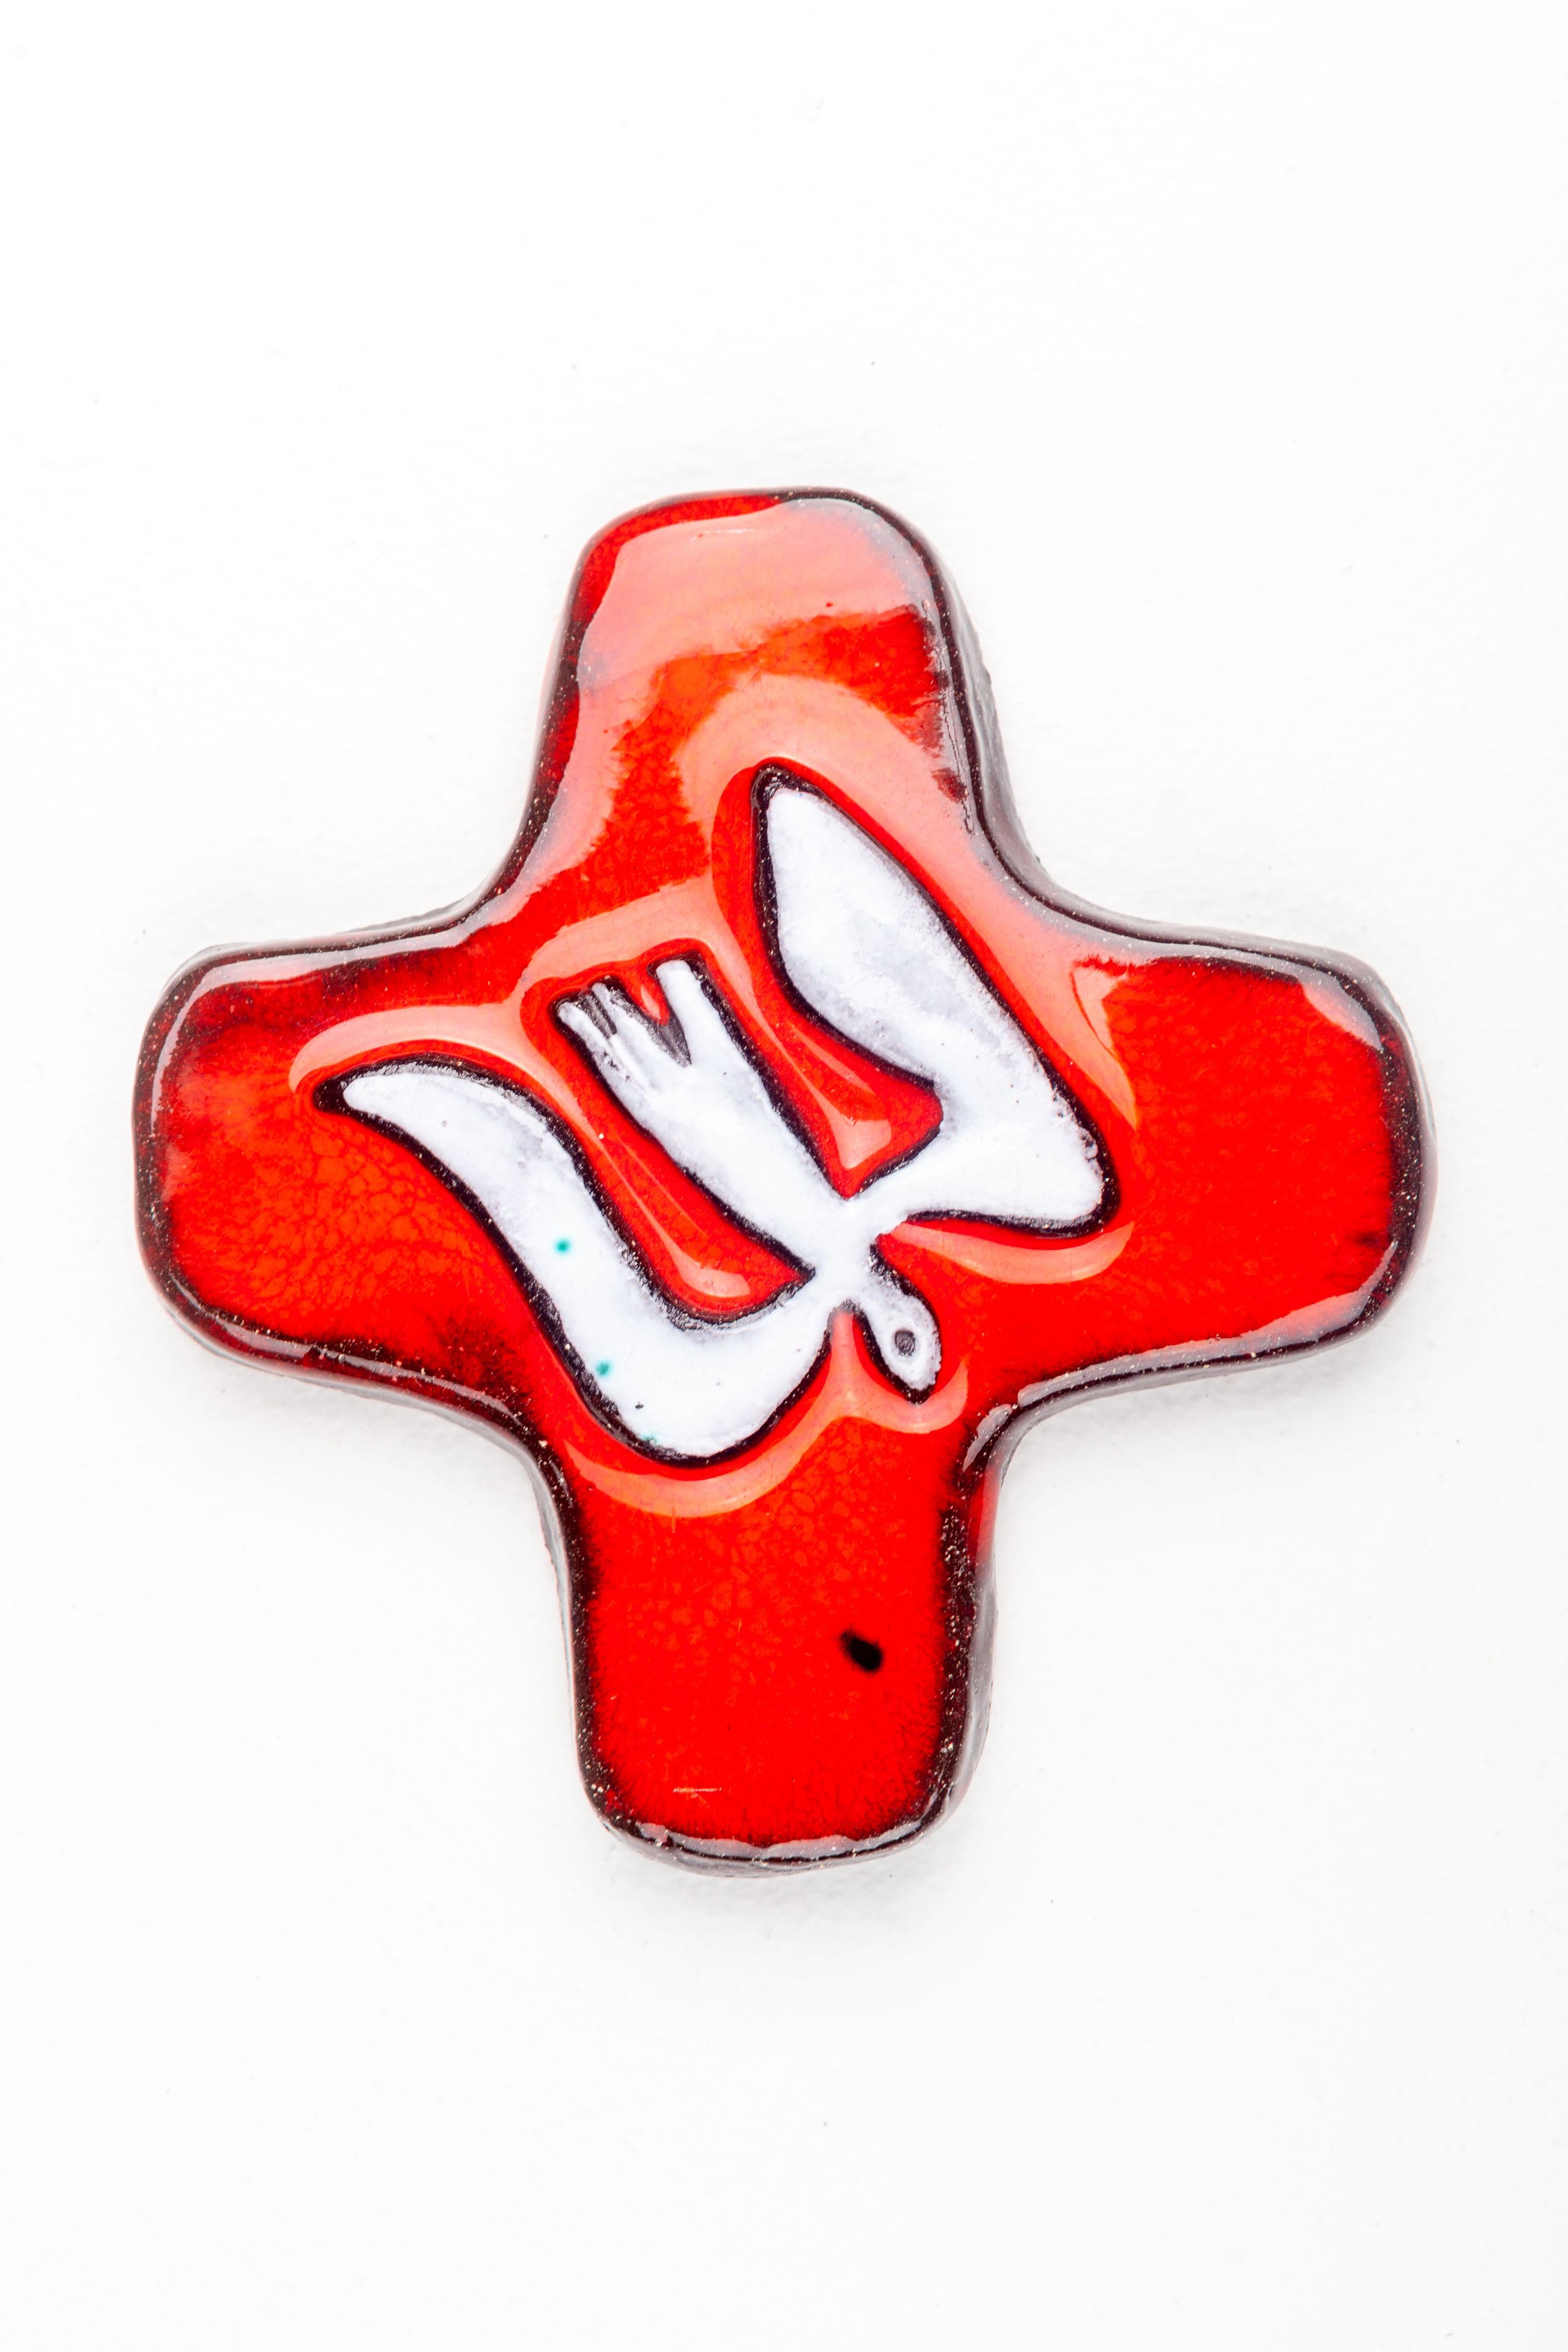 This mid-century modern ceramic cross showcases the bold, expressive aesthetic that was prevalent among European studio pottery artists during the 1950s to 1970s. The vivid red glaze serves as a dramatic backdrop to the abstract white dove form at